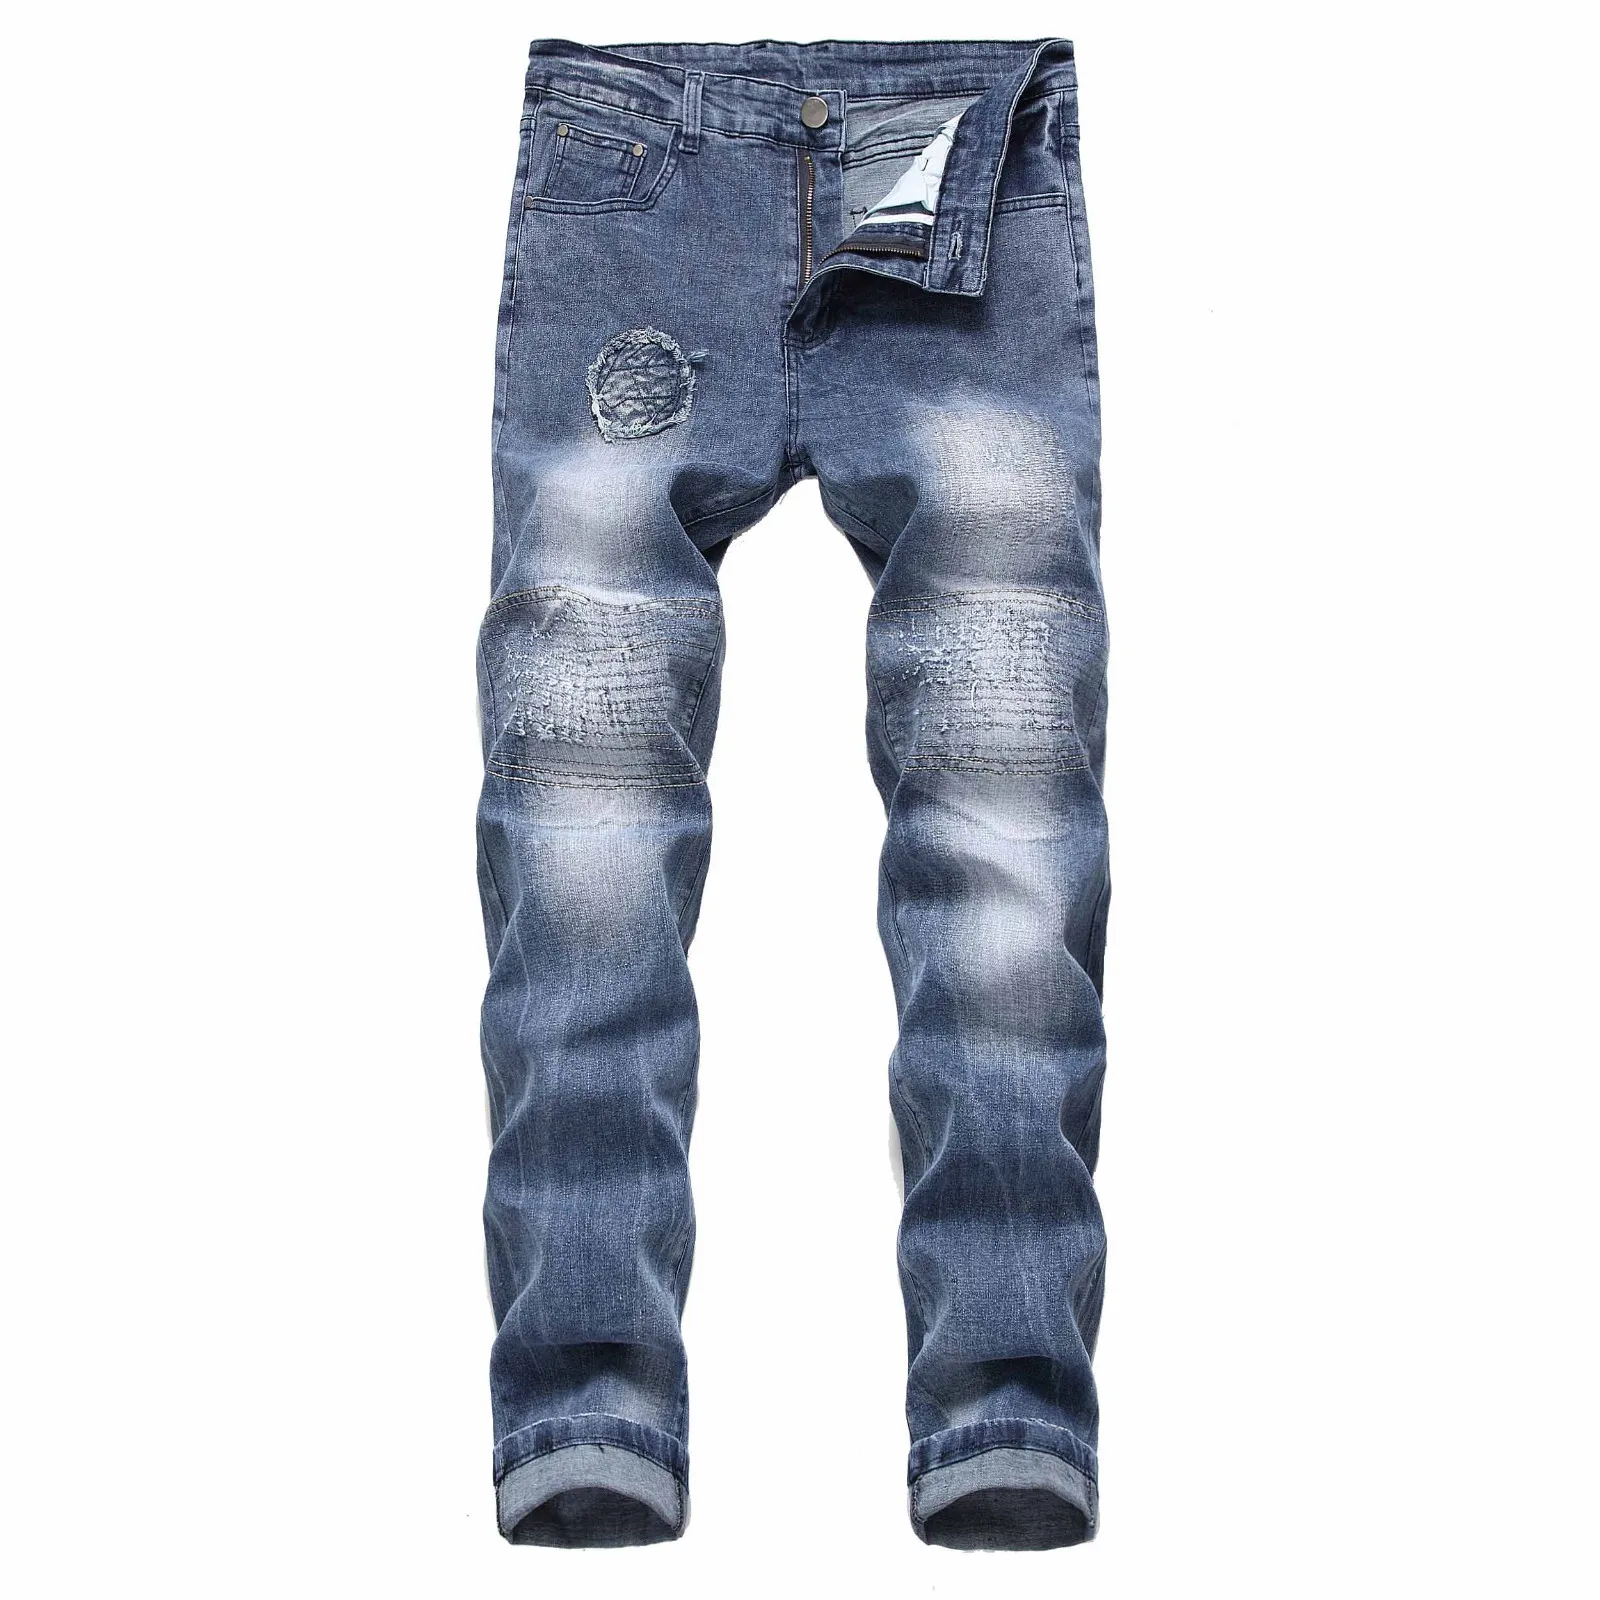 2018 Simple Casual Jeans Hole Fold Striped Pants Men's Stretchy Ripped ...